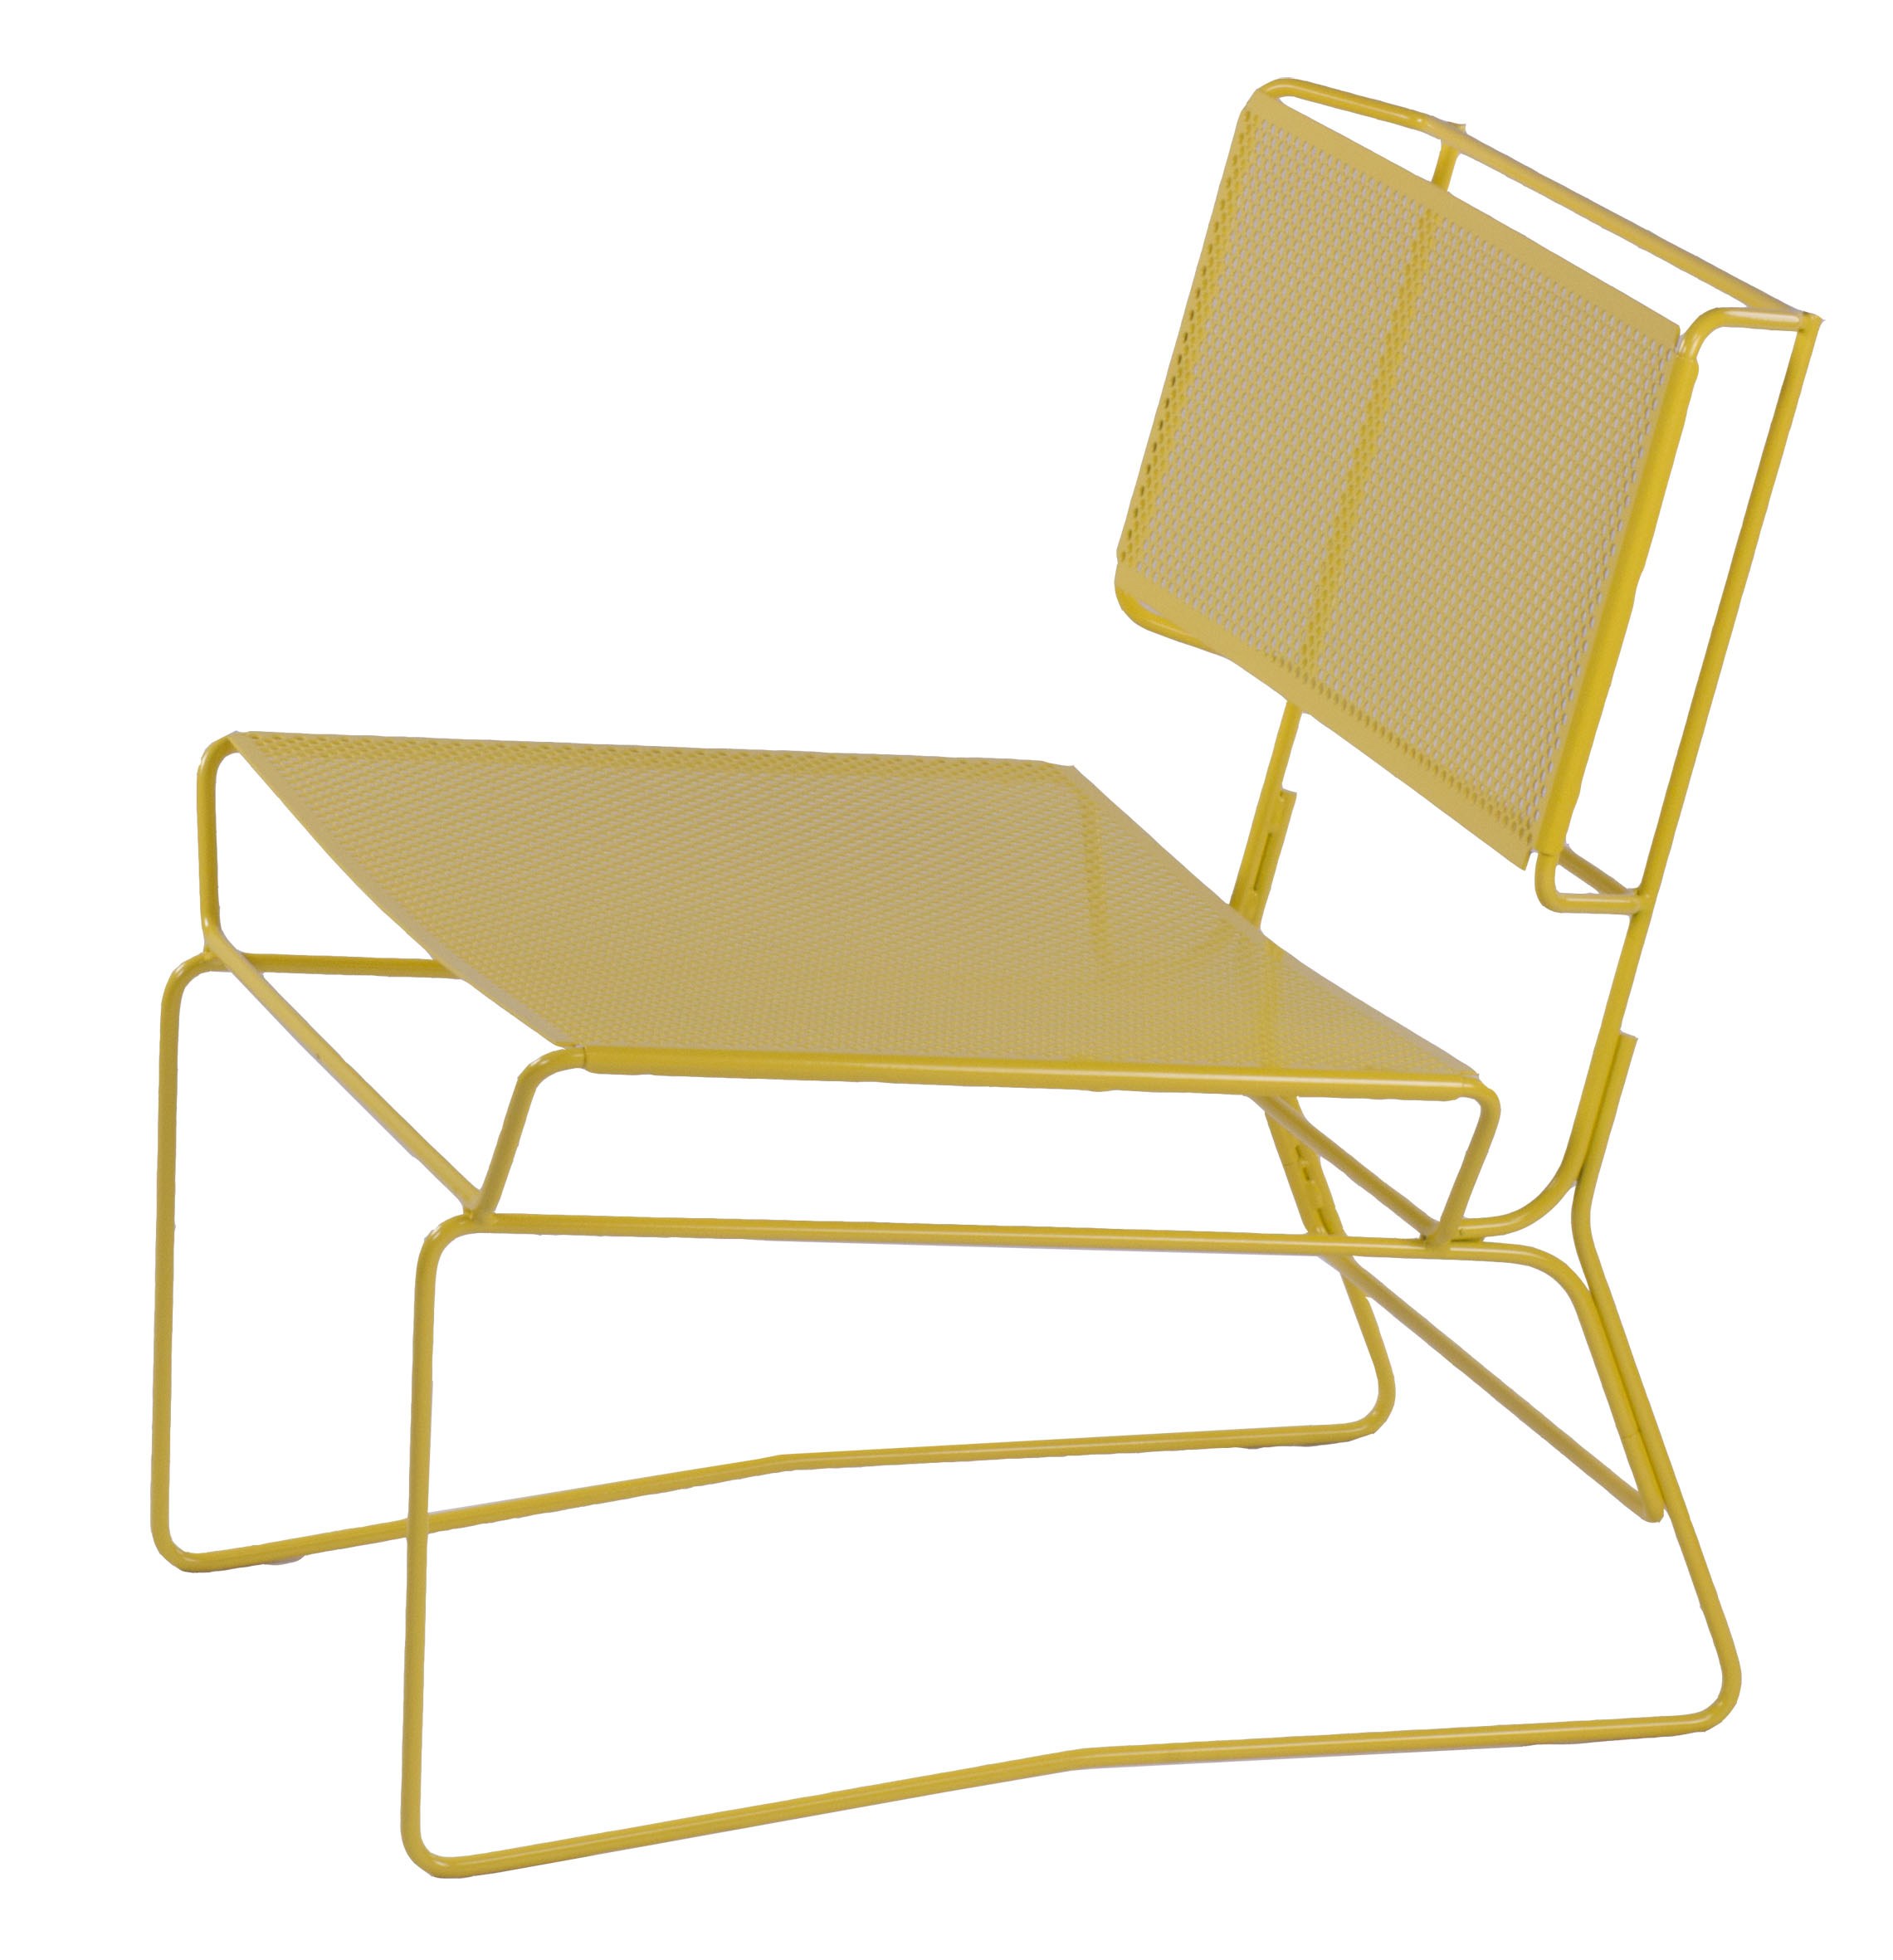 FIL Chair by François Azambourg for AA New Design